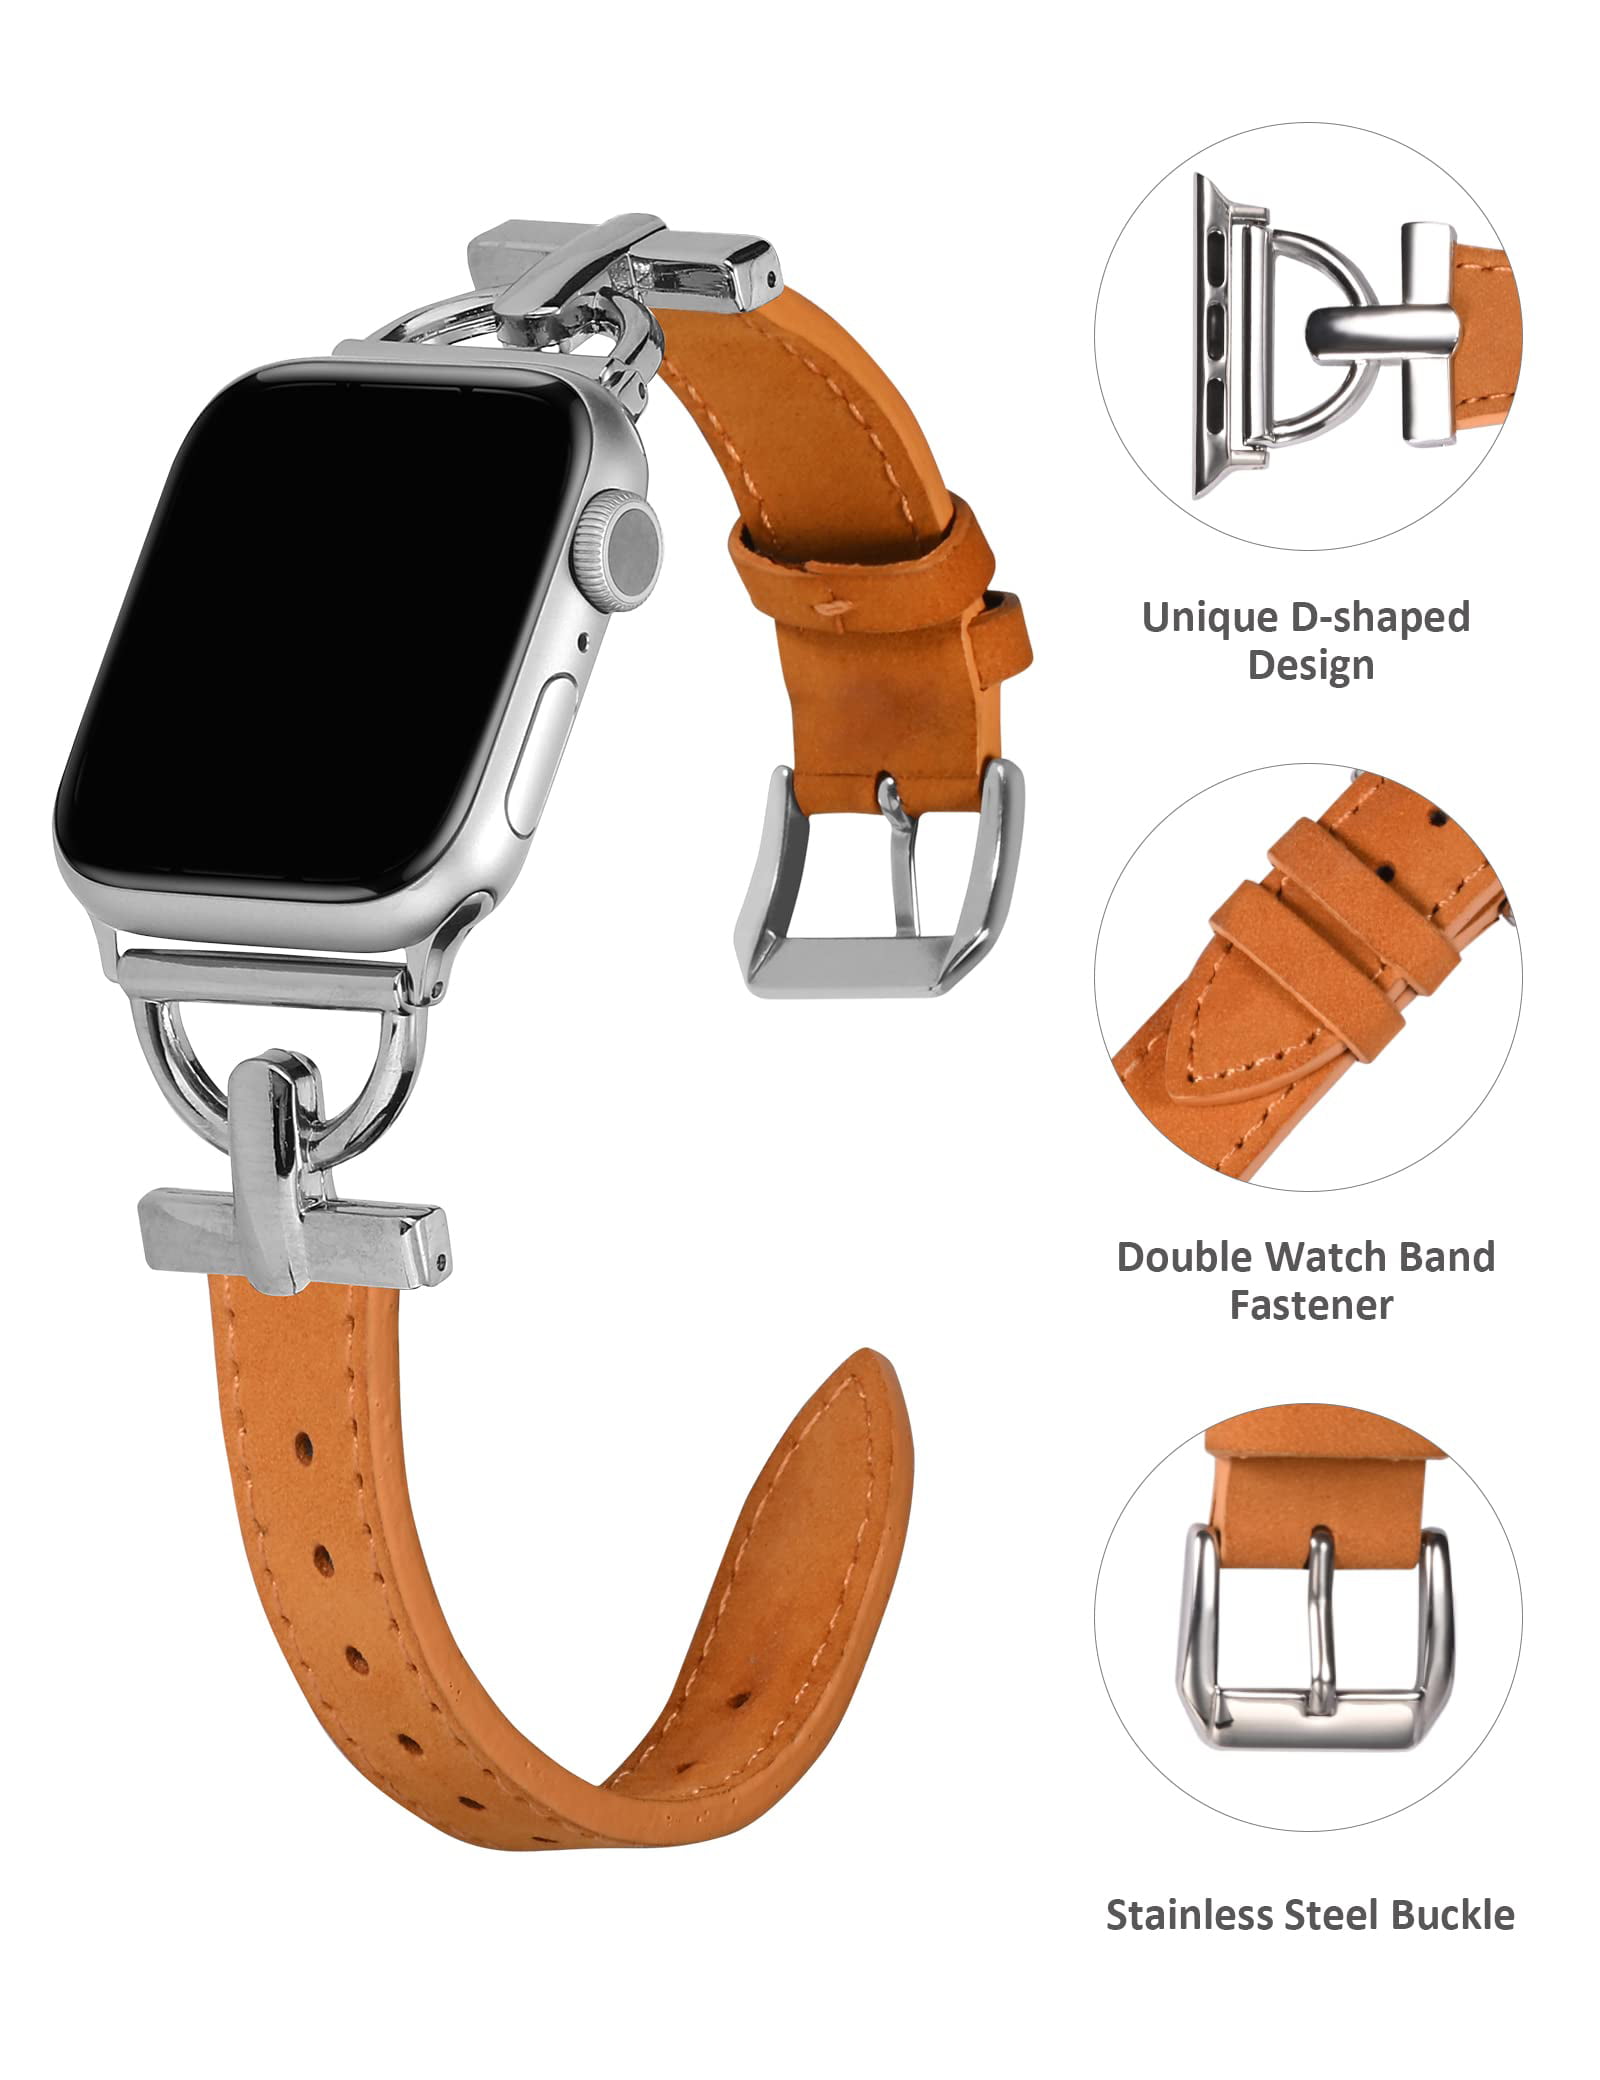 Uonles Designer Band Compatible with Apple Watch 45mm 44mm 42mm, Luxury Beige Plaid Elements Soft Leather iWatch Band with Classic Firmly Buckle for iWatch